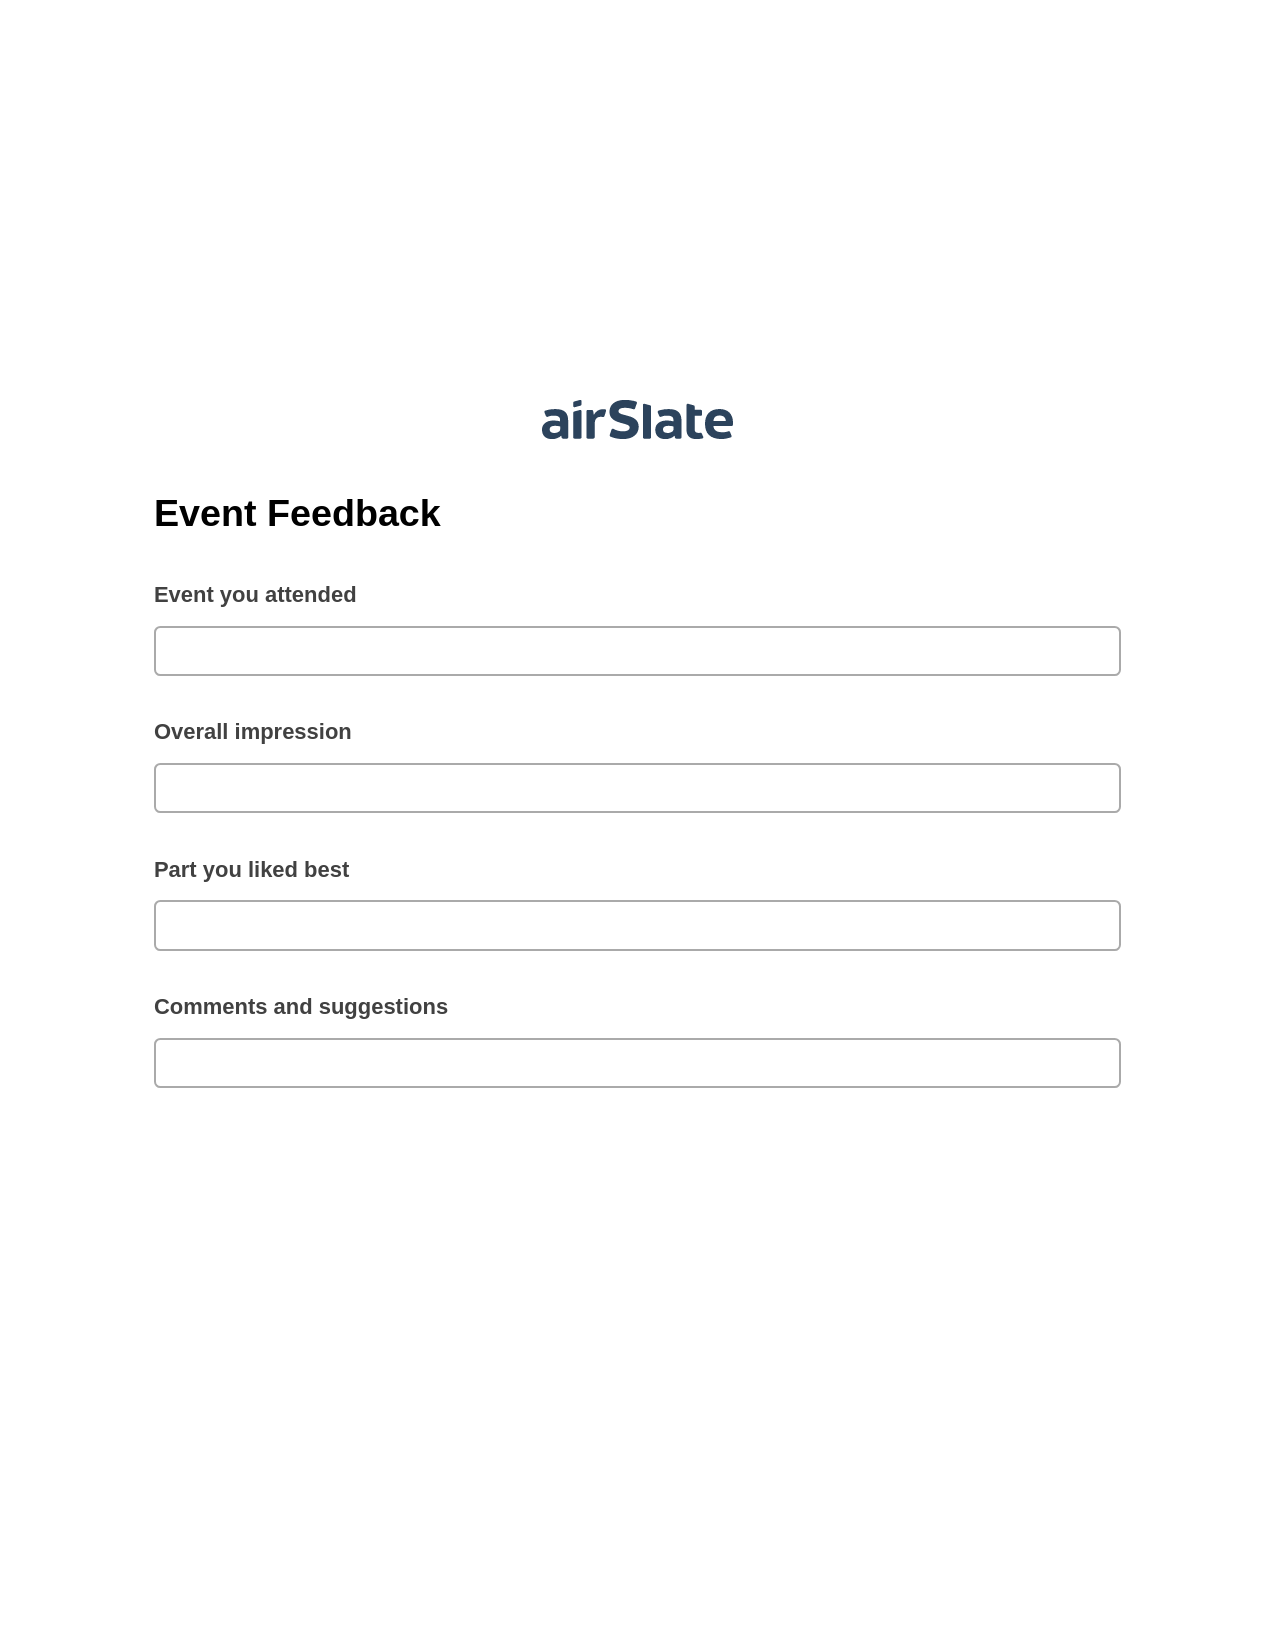 Multirole Event Feedback Pre-fill from Salesforce Record Bot, Unassign Role Bot, OneDrive Bot